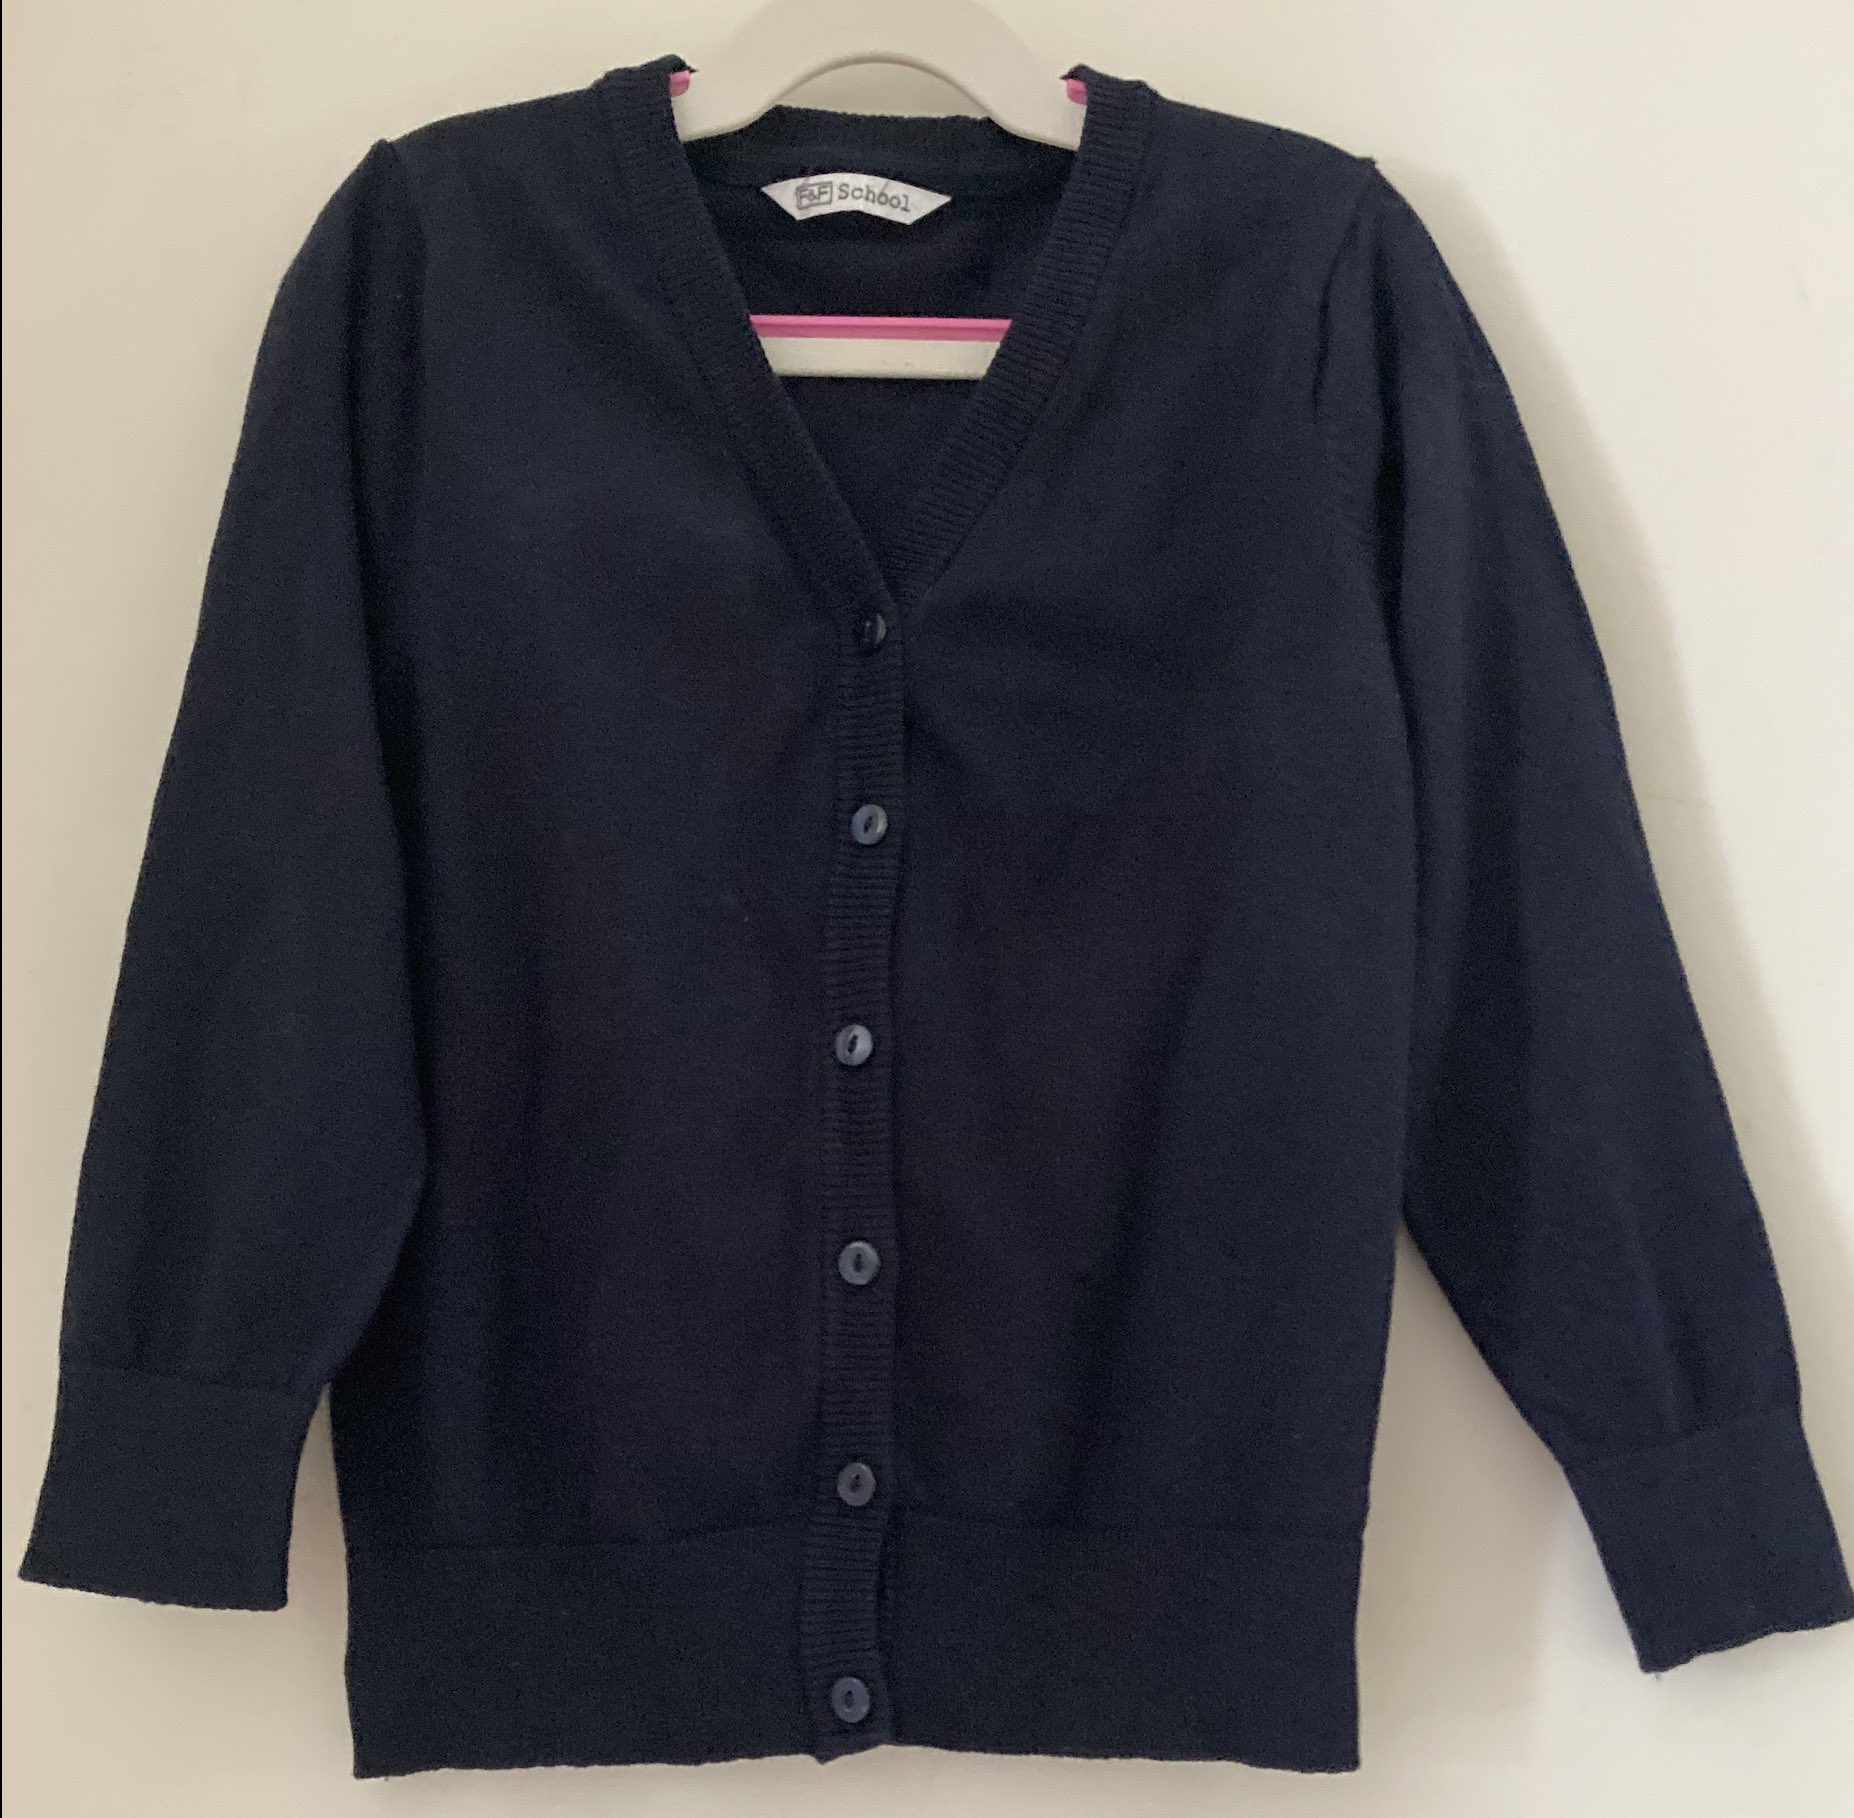 Girls' Navy V-neck Cardigan, Button Front 6-7 Y